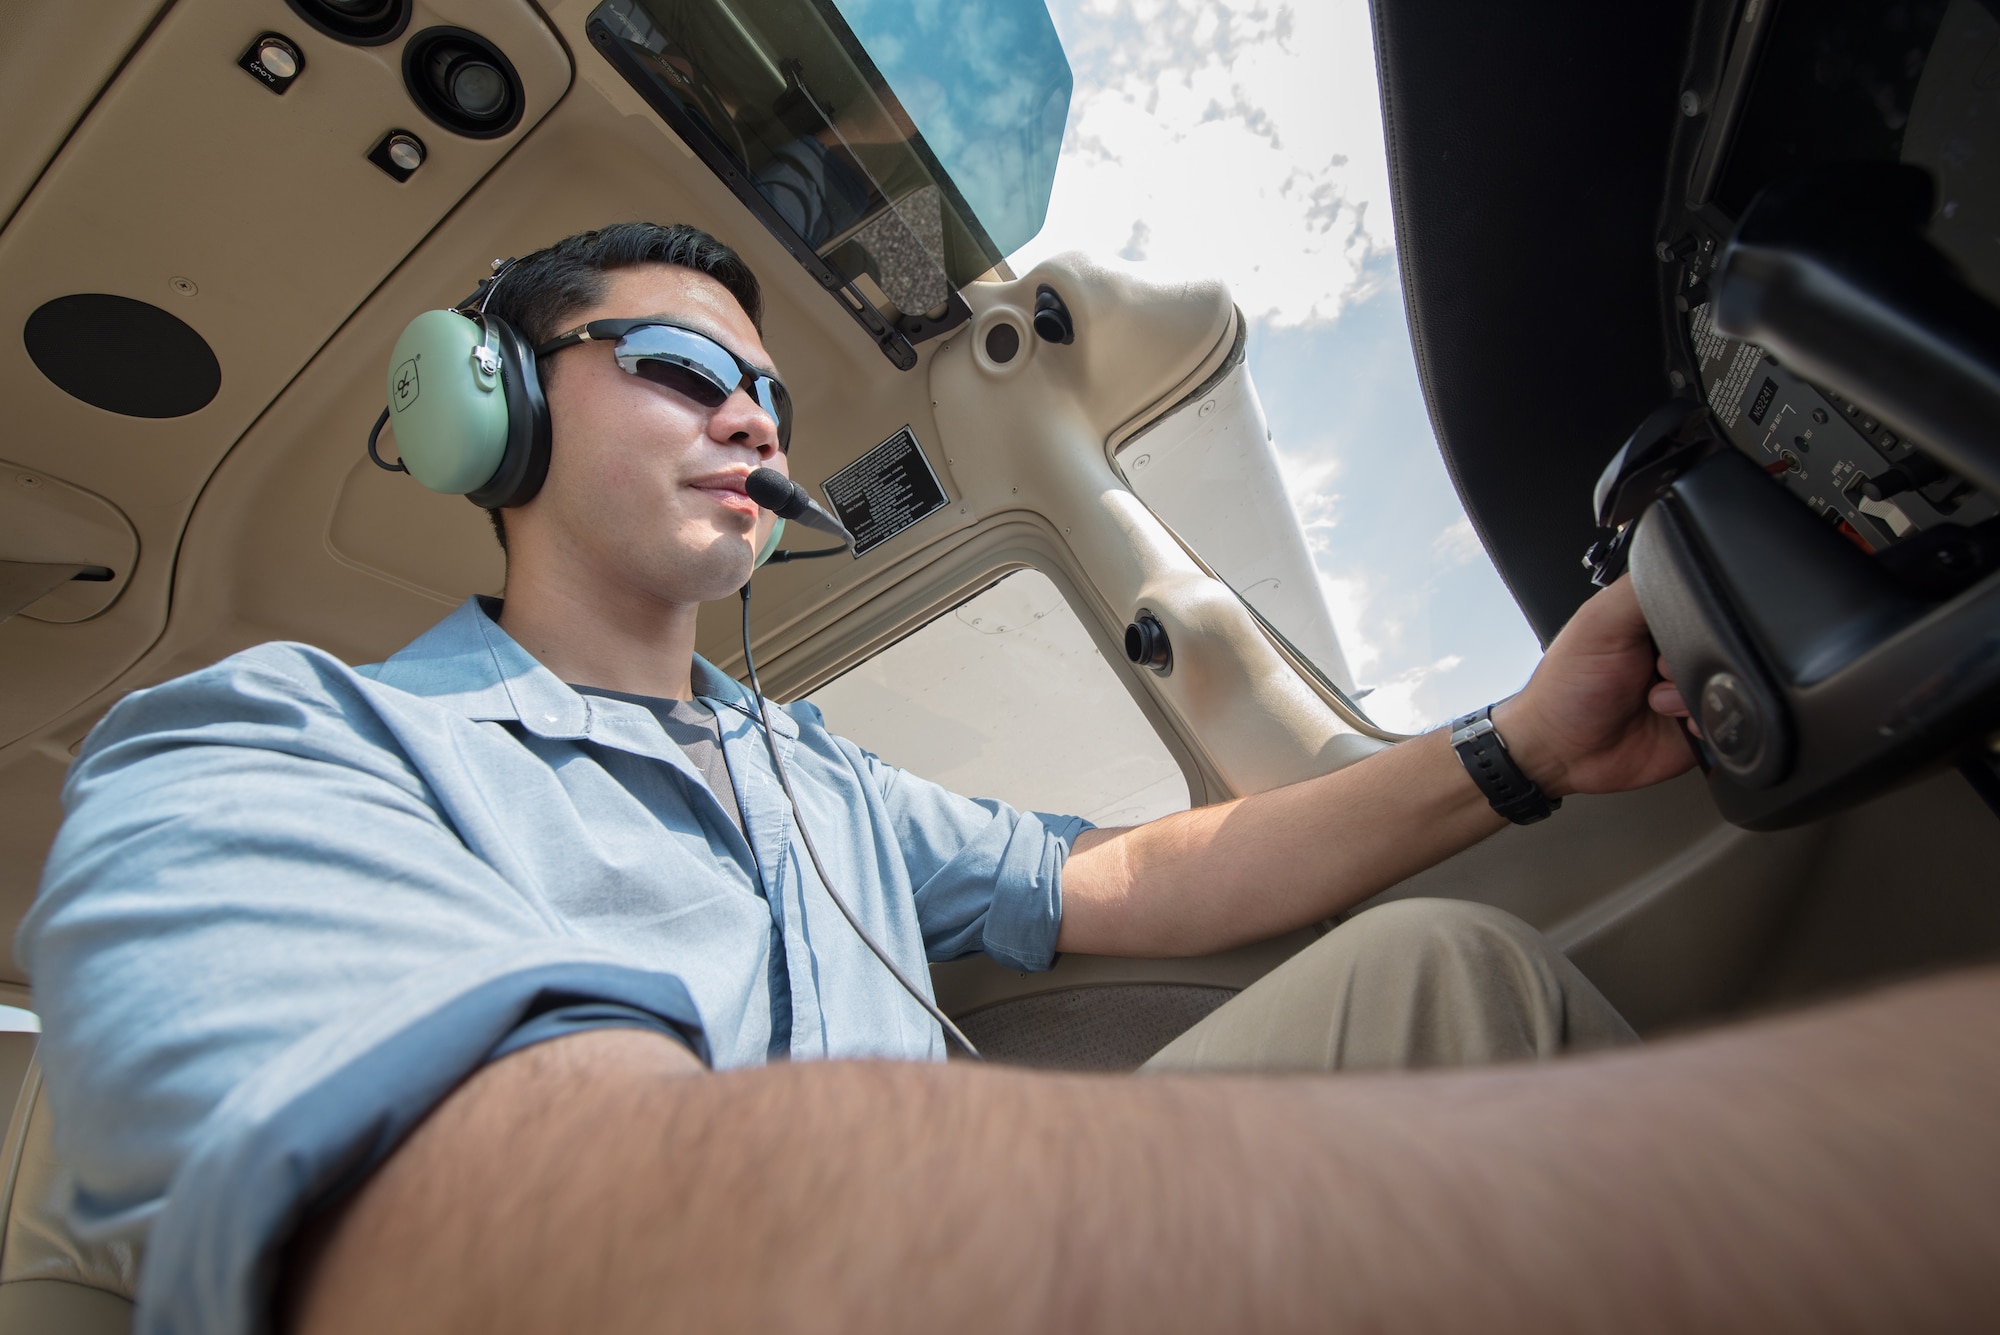 Cadet James Huang, North Gwinnett High School, Suwanee, Georgia, sits in the cockpit of a trainer aircraft at Auburn University, Alabama, in summer 2018. The Chief of Staff of the Air Force Flight Academy scholarship program allows selected Air Force Junior ROTC cadets to attend an accredited aviation program at one of six partnering universities to get a private pilot license. Despite being shut down in summer 2020 because of the COVID-19 pandemic, AFJROTC is now accepting applications to the Flight Academy for summer 2021.  (U.S. Air Force photo by Airman Matthew Markivee)